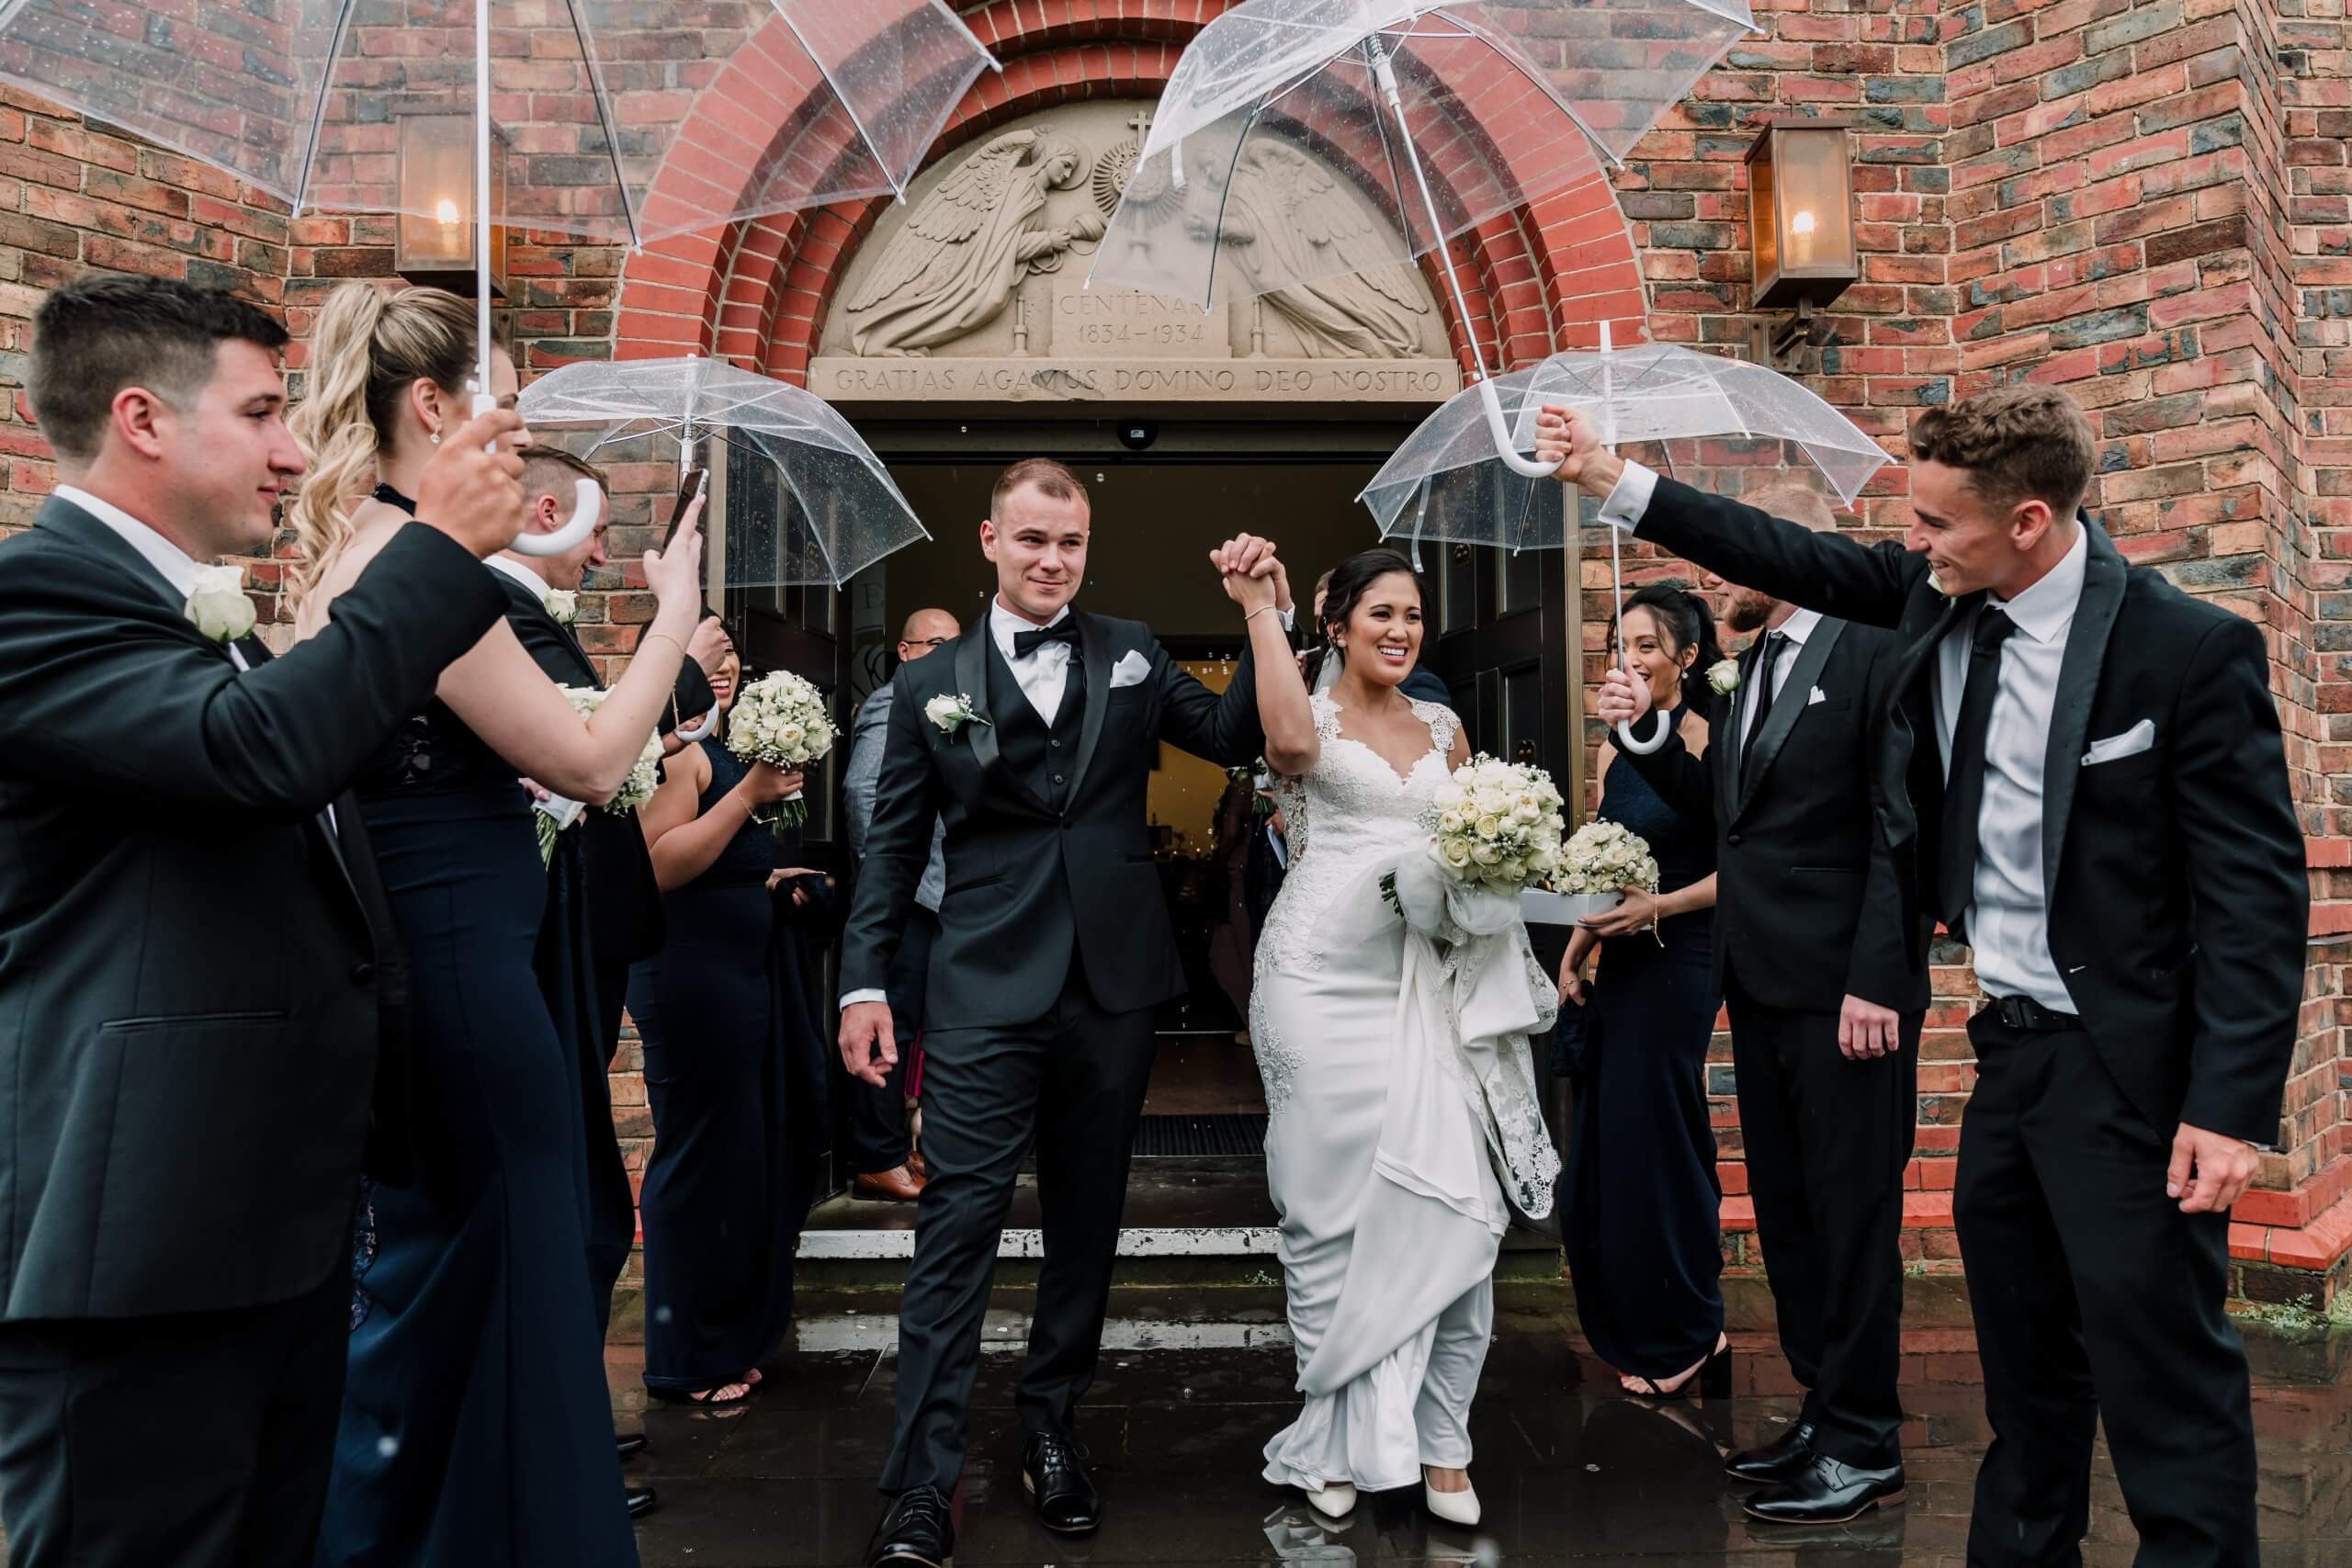 Guests offering umbrellas to the newlyweds while they walk out of the church , captured by black avenue productions. Wedding Day Interrupted by bad weather